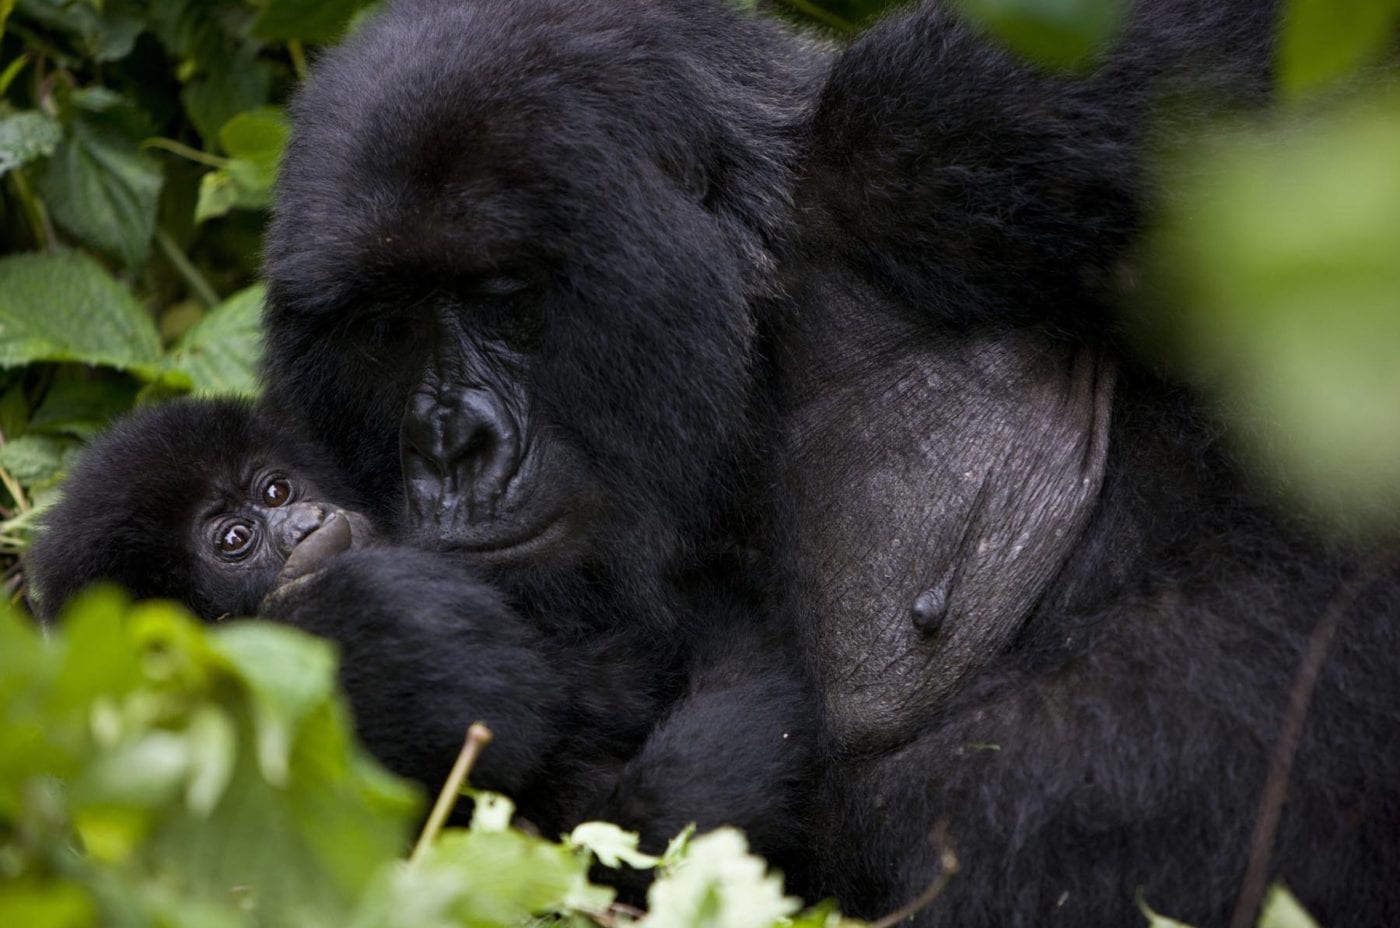 Mountain gorilla mother and its baby gorilla lying in their natural habitat